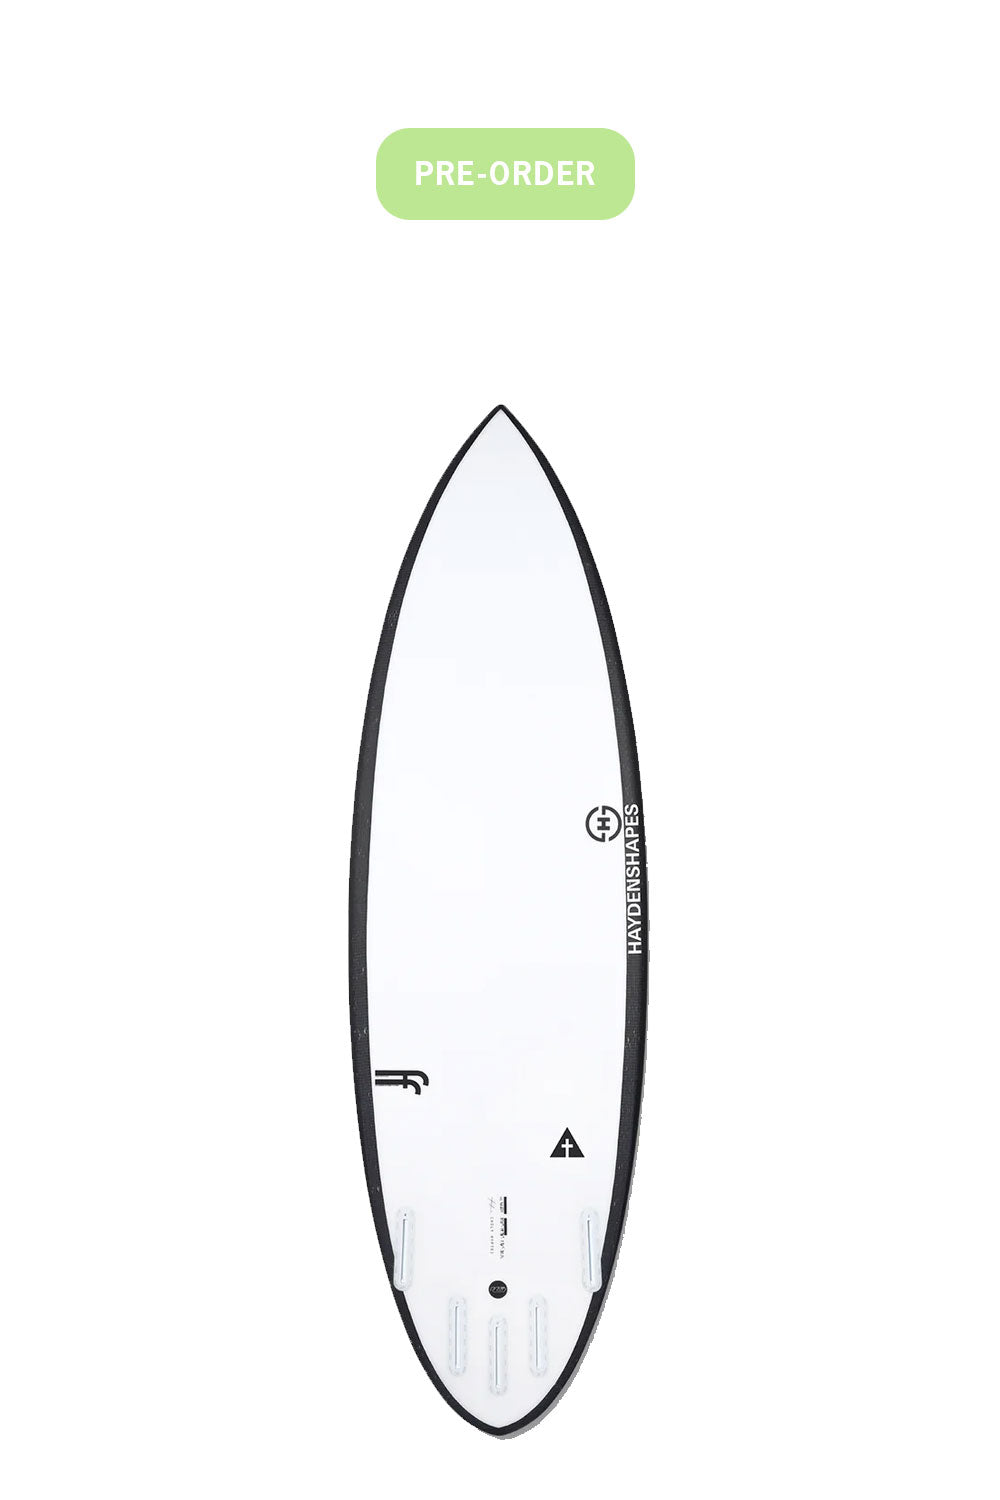 Pukas-Surf-Shop-HaydenShapes-Surfboards-Pre-Order-holy-hypto-clear